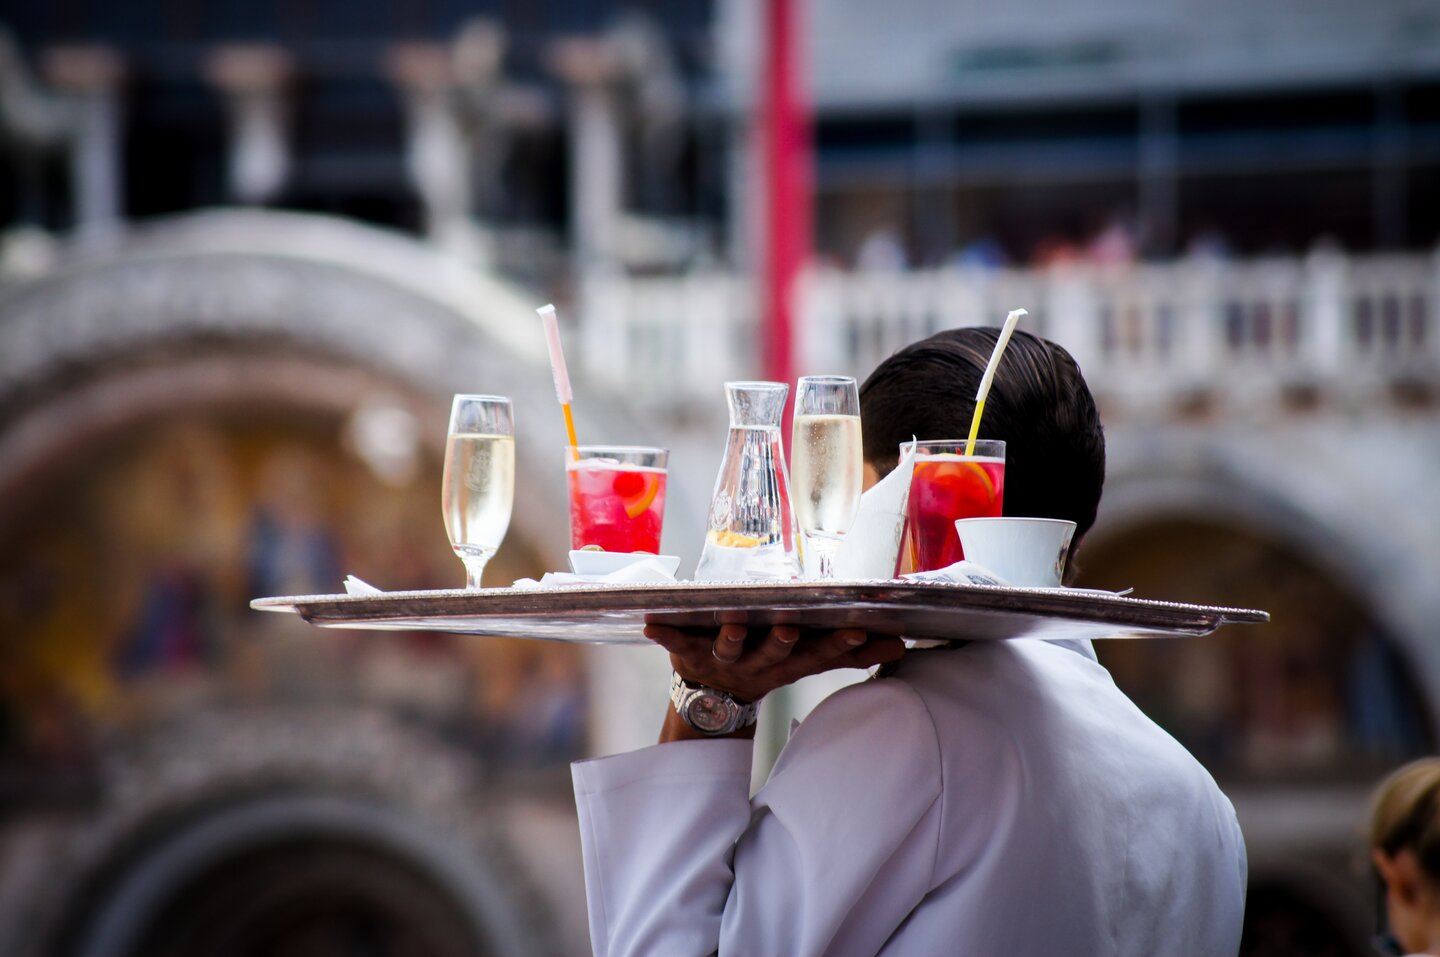 Waiter holding a tray of drinks